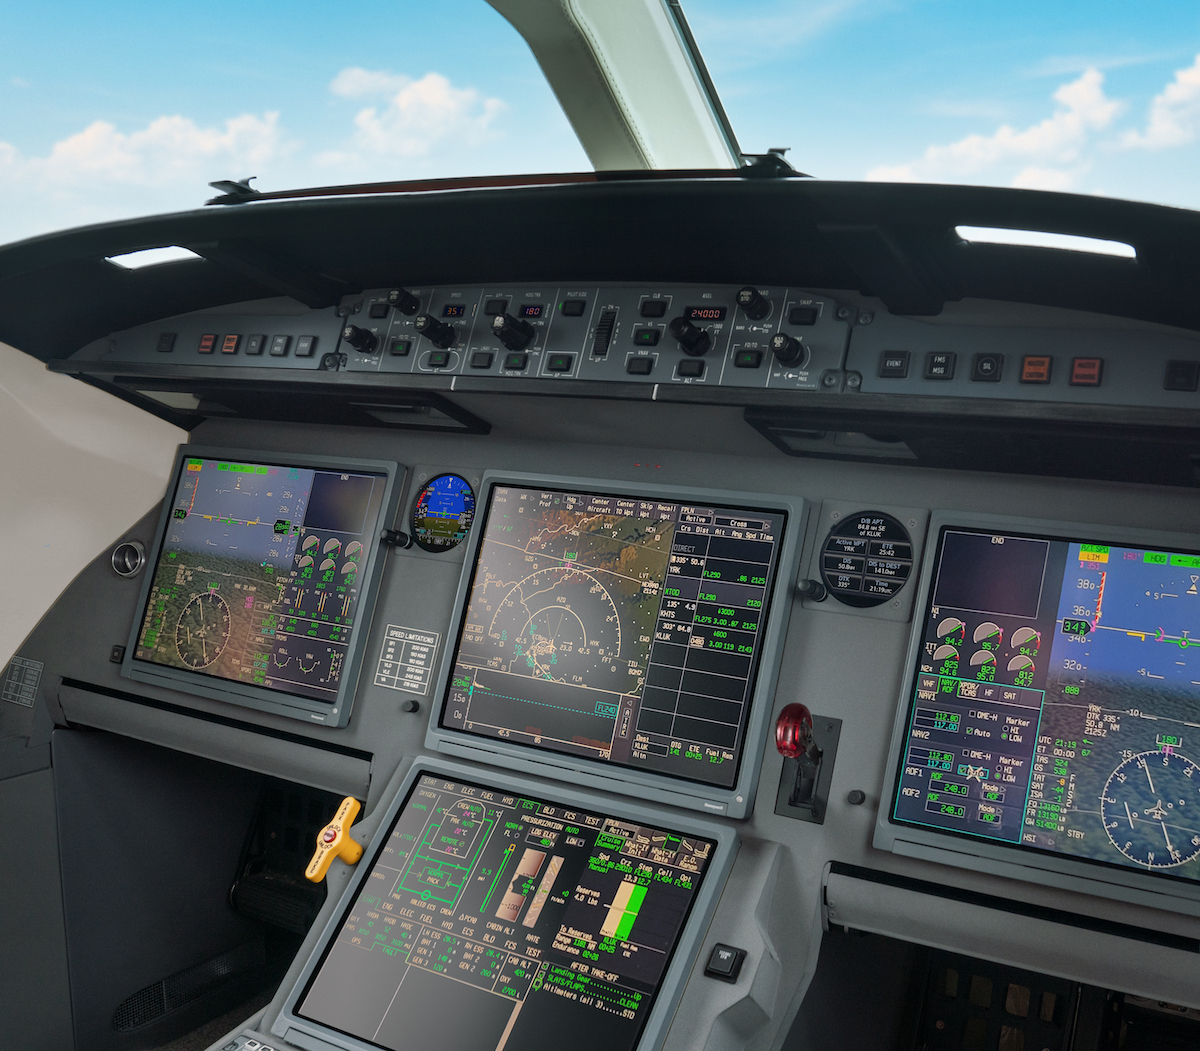 Garmin  Received  Supplemental Type  Certification  from  FAA  for the  GI 275  electronic  flight  instrument  Integration  in  the  Dassault  Falcon 7X  Jet !